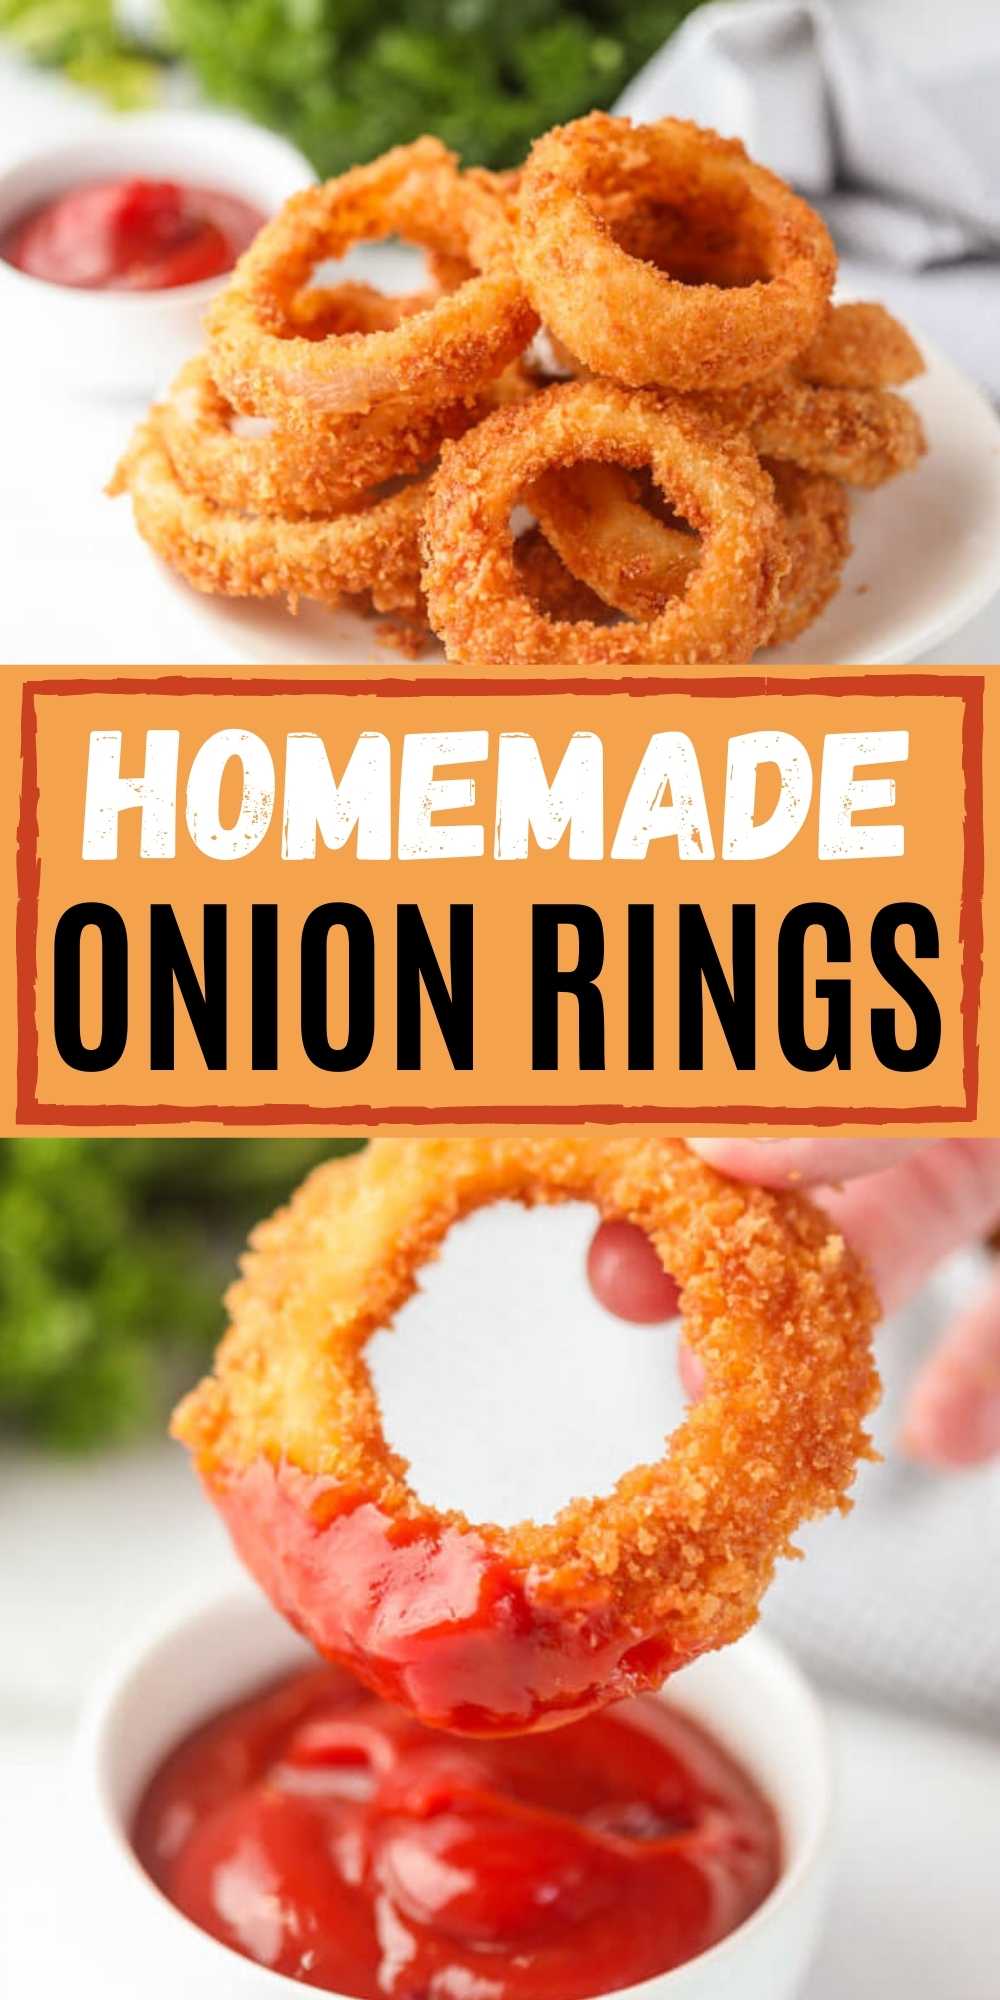 Homemade Fried Onion Rings will be a huge hit appetizer that you will want to make again and again! These homemade onion rings with an easy batter are simple to make and delicious too! You will love this easy onion ring recipe! #eatingonadime #appetizerrecipes #homemadeonionrings 
